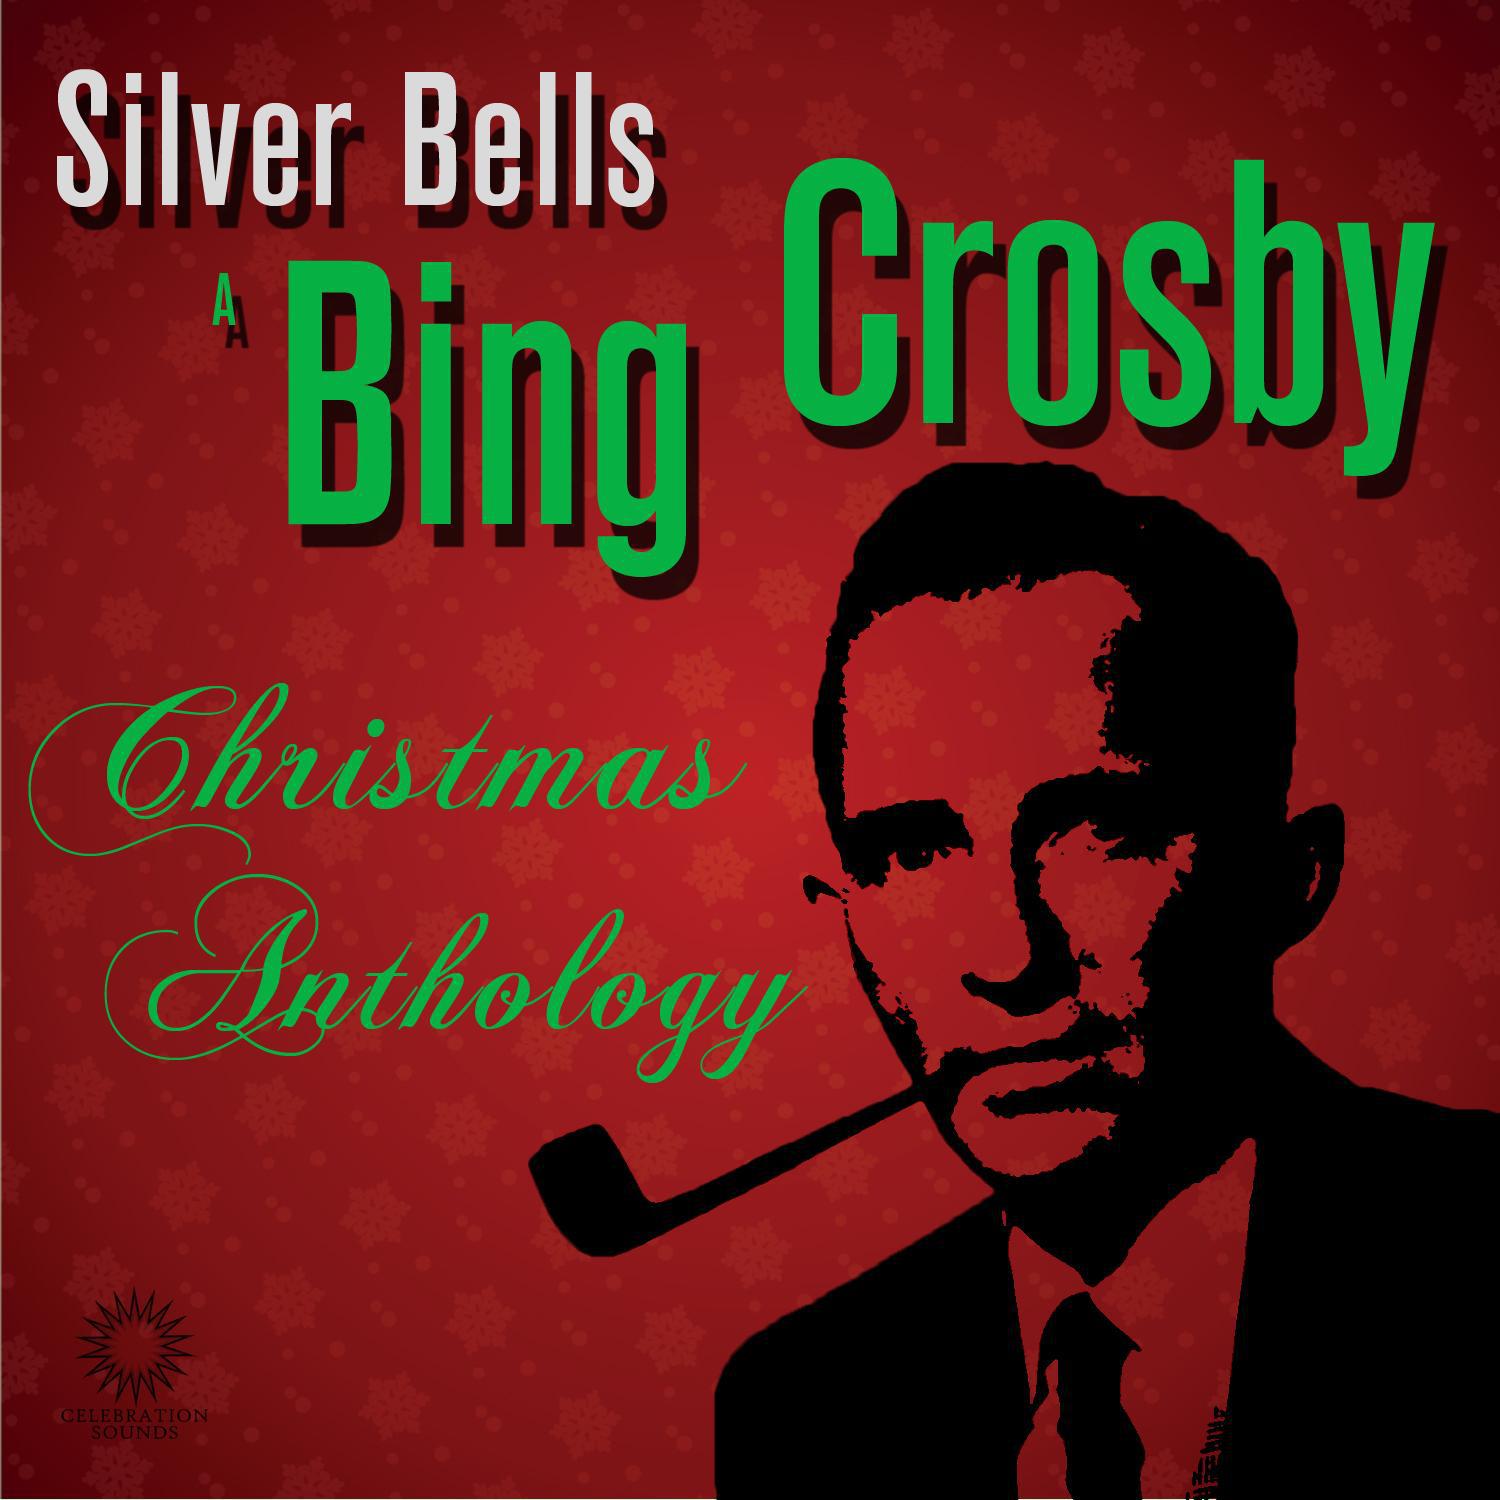 Silver Bells: A Bing Crosby Christmas Anthology Including White Christmas, Chestnuts Roasting on an 专辑